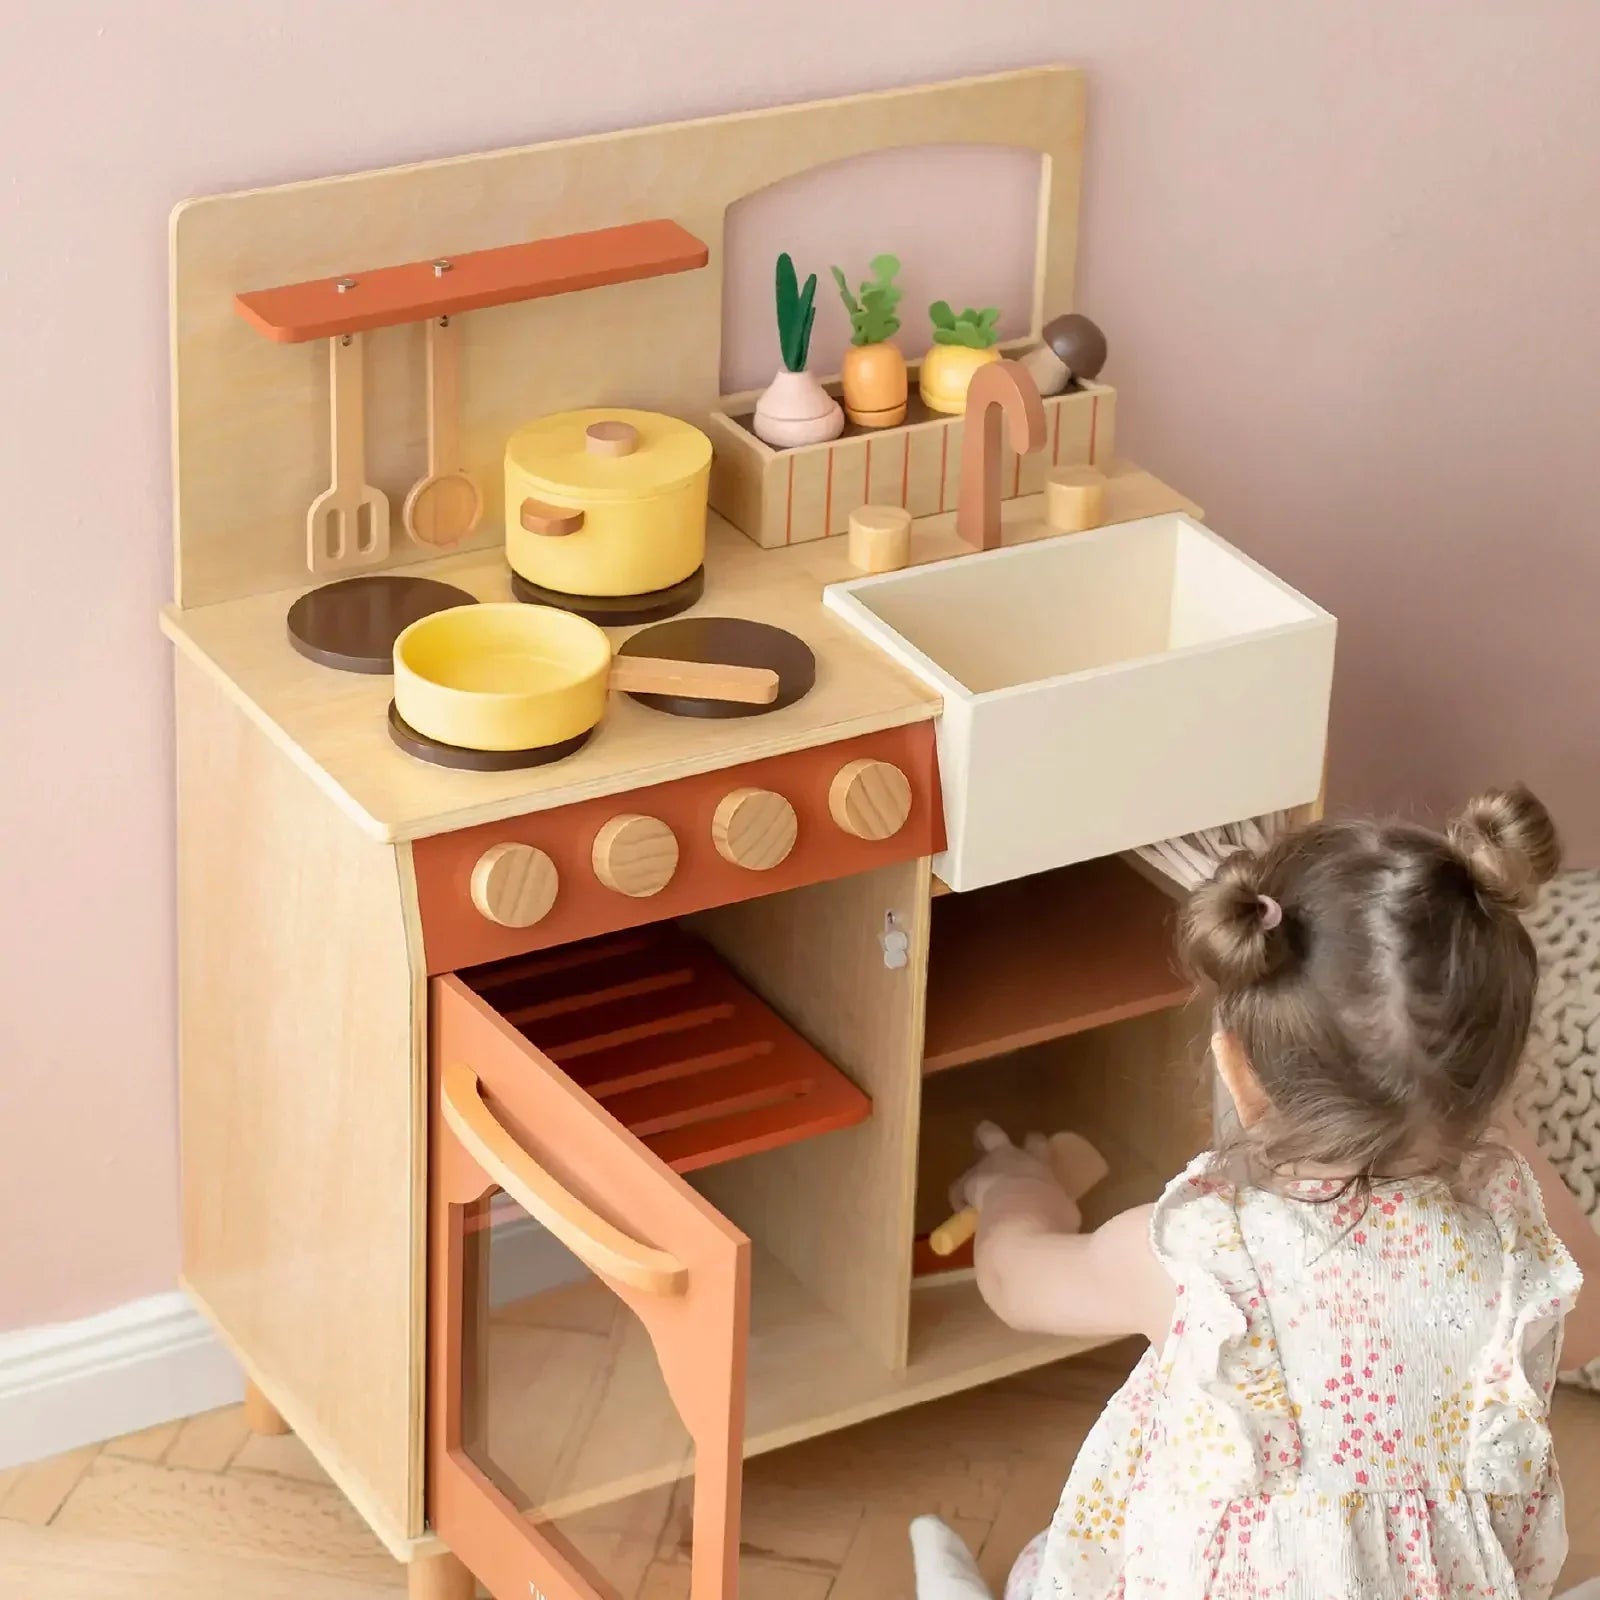 Tiny Land® Modern Versatile Wooden Kids Play Kitchen | Tiny Land Offical Store® | All for Kids